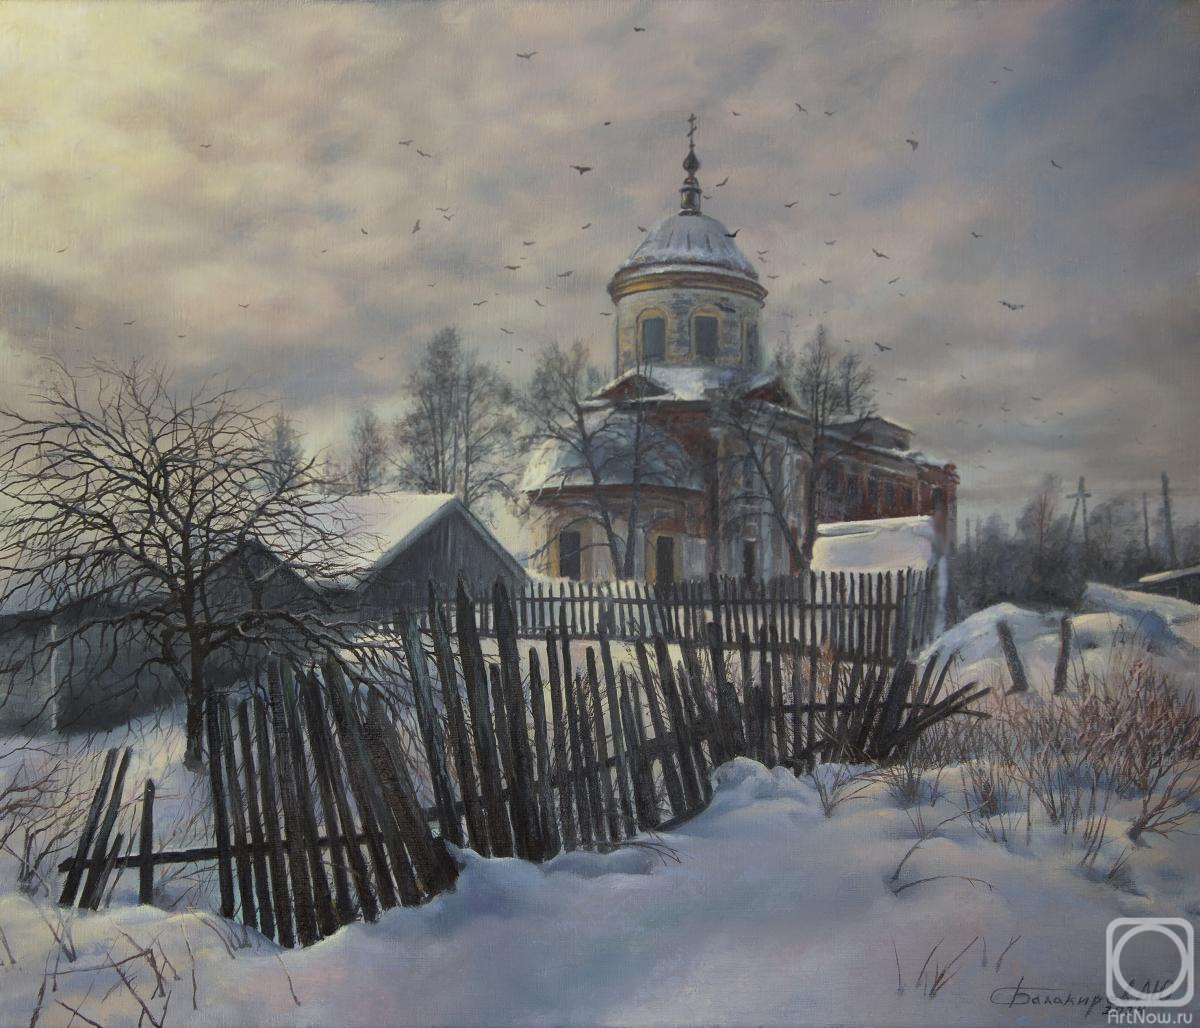 Balakirev Andrey. The rural hinterland is thinning out